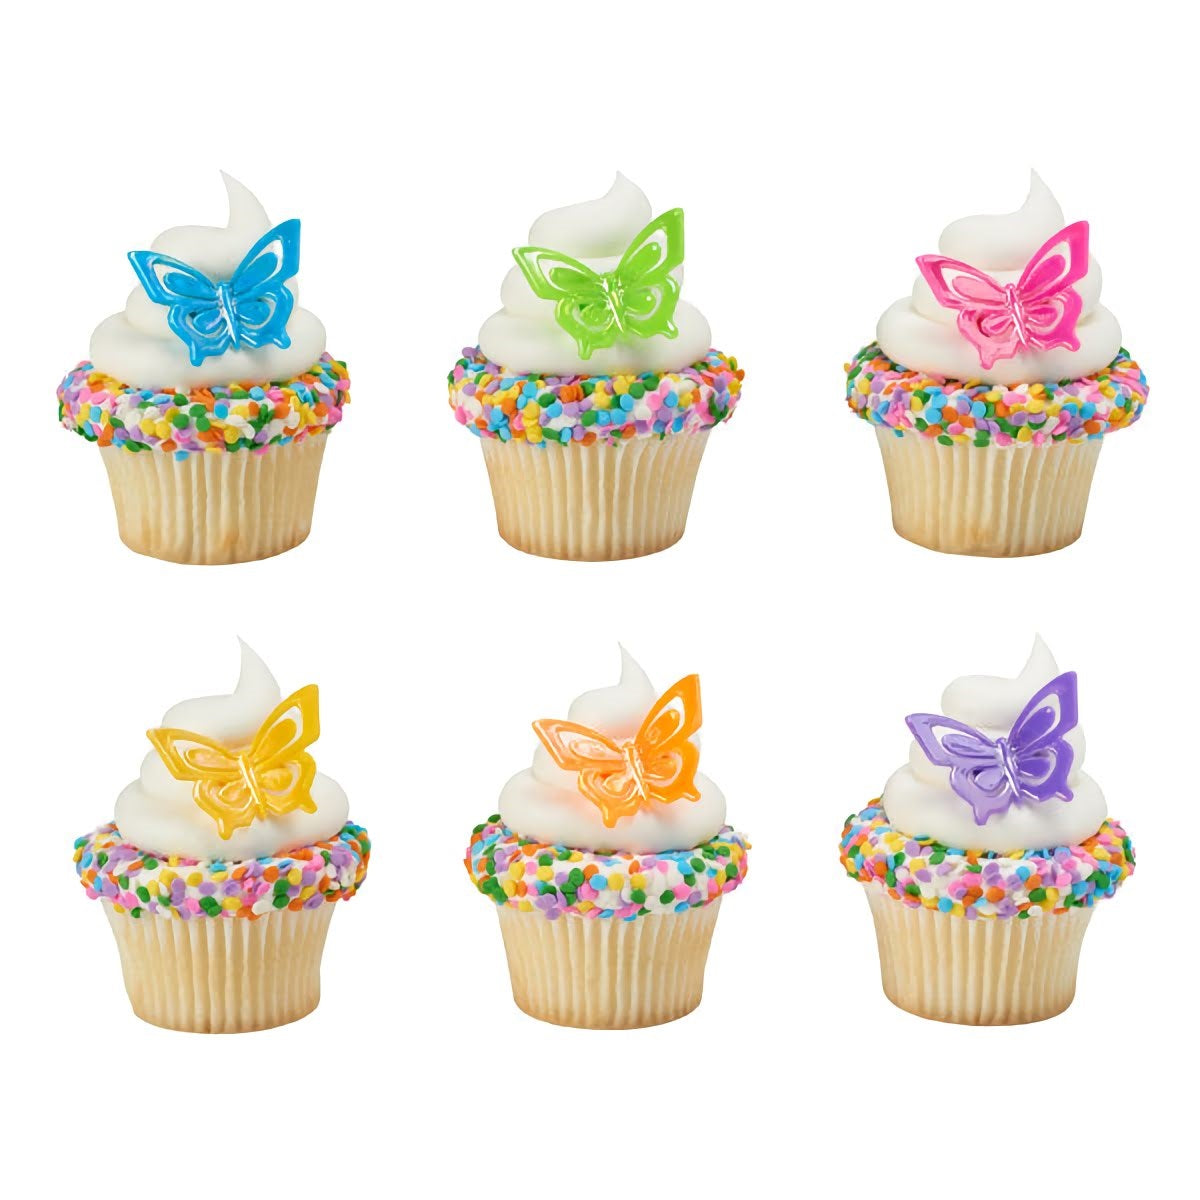 Intricately designed butterfly toppers in various vibrant colors: blue, green, pink, yellow, orange, and purple, creating a whimsical touch perfect for springtime celebrations or as charming additions to a nature-themed party.